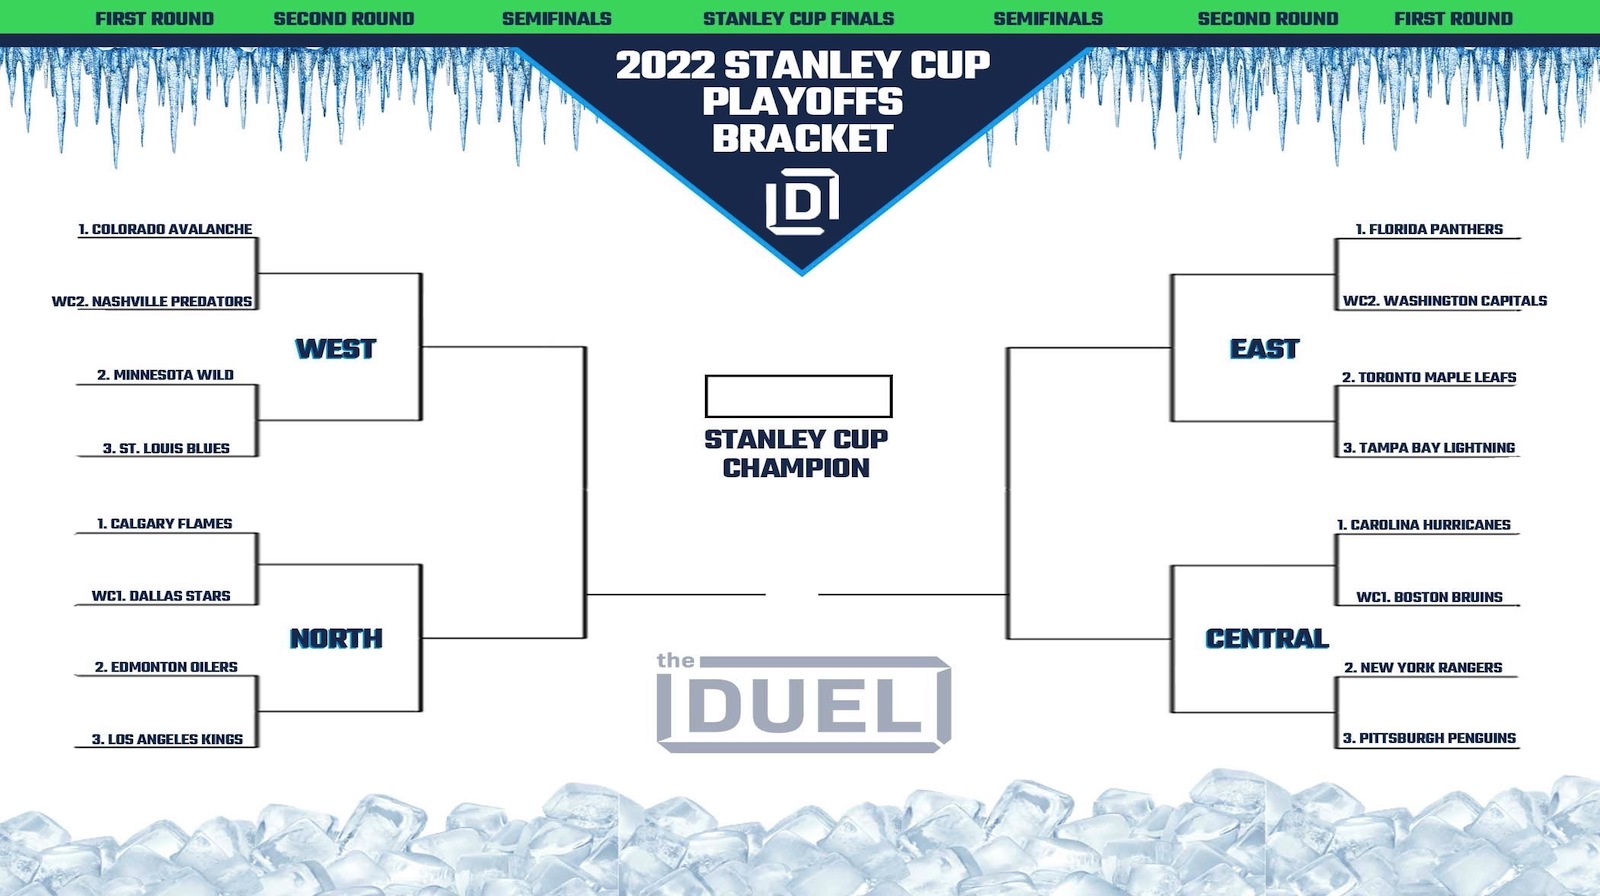 Printable 2021 MLB Playoff Bracket - Fill Out Your Picks Here